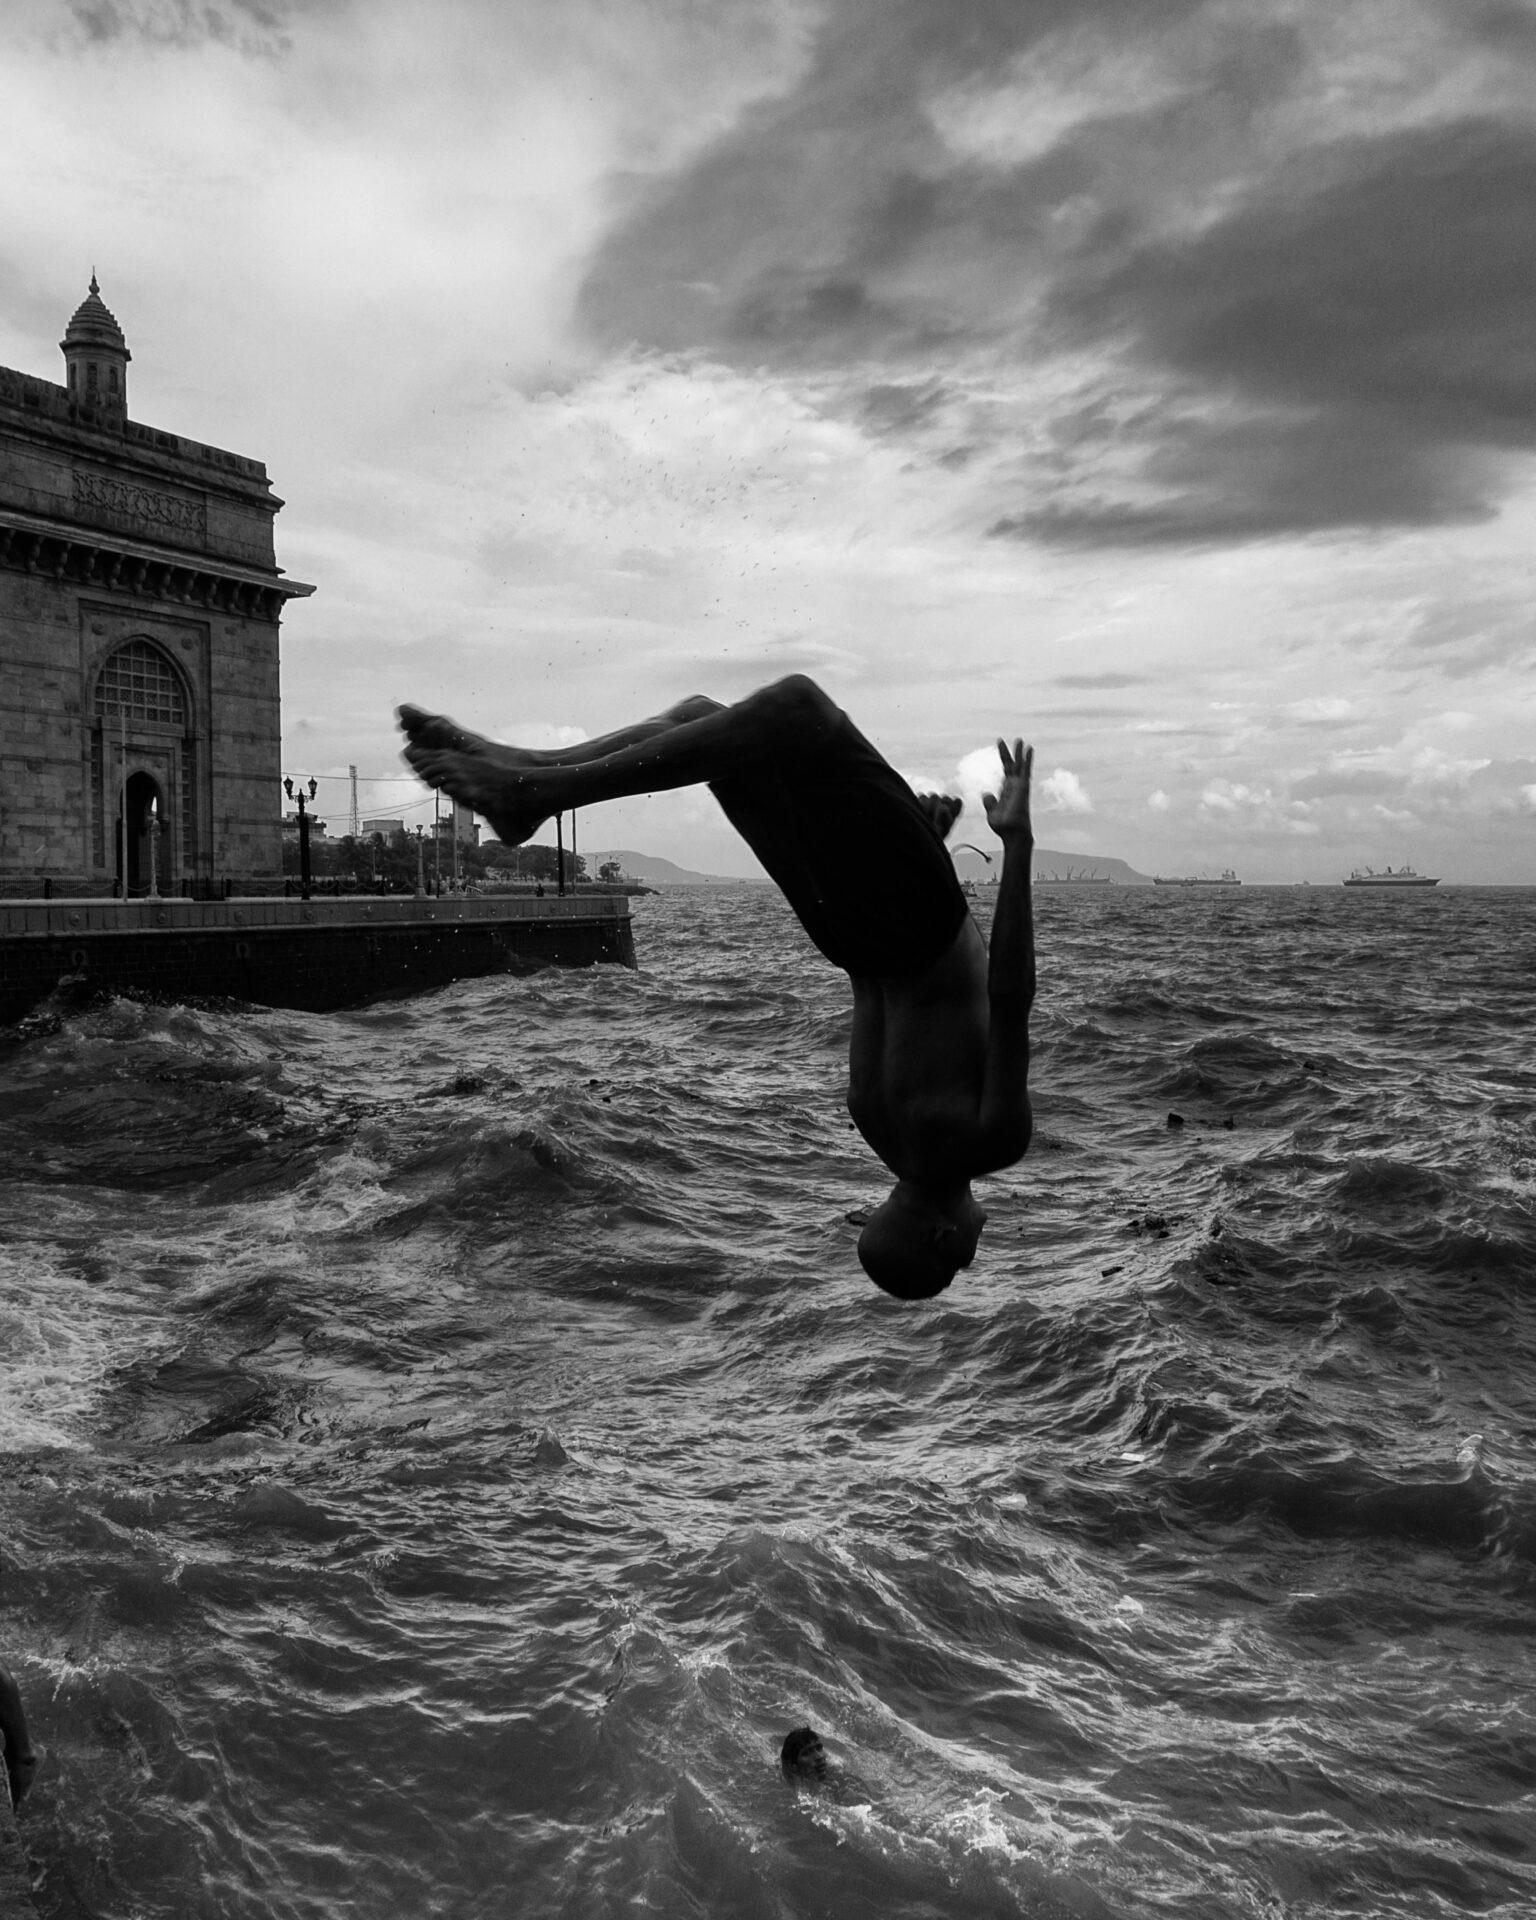 Photographer Sunhil Sippy on Mumbai | the silhouette of a person backflipping into choppy waters